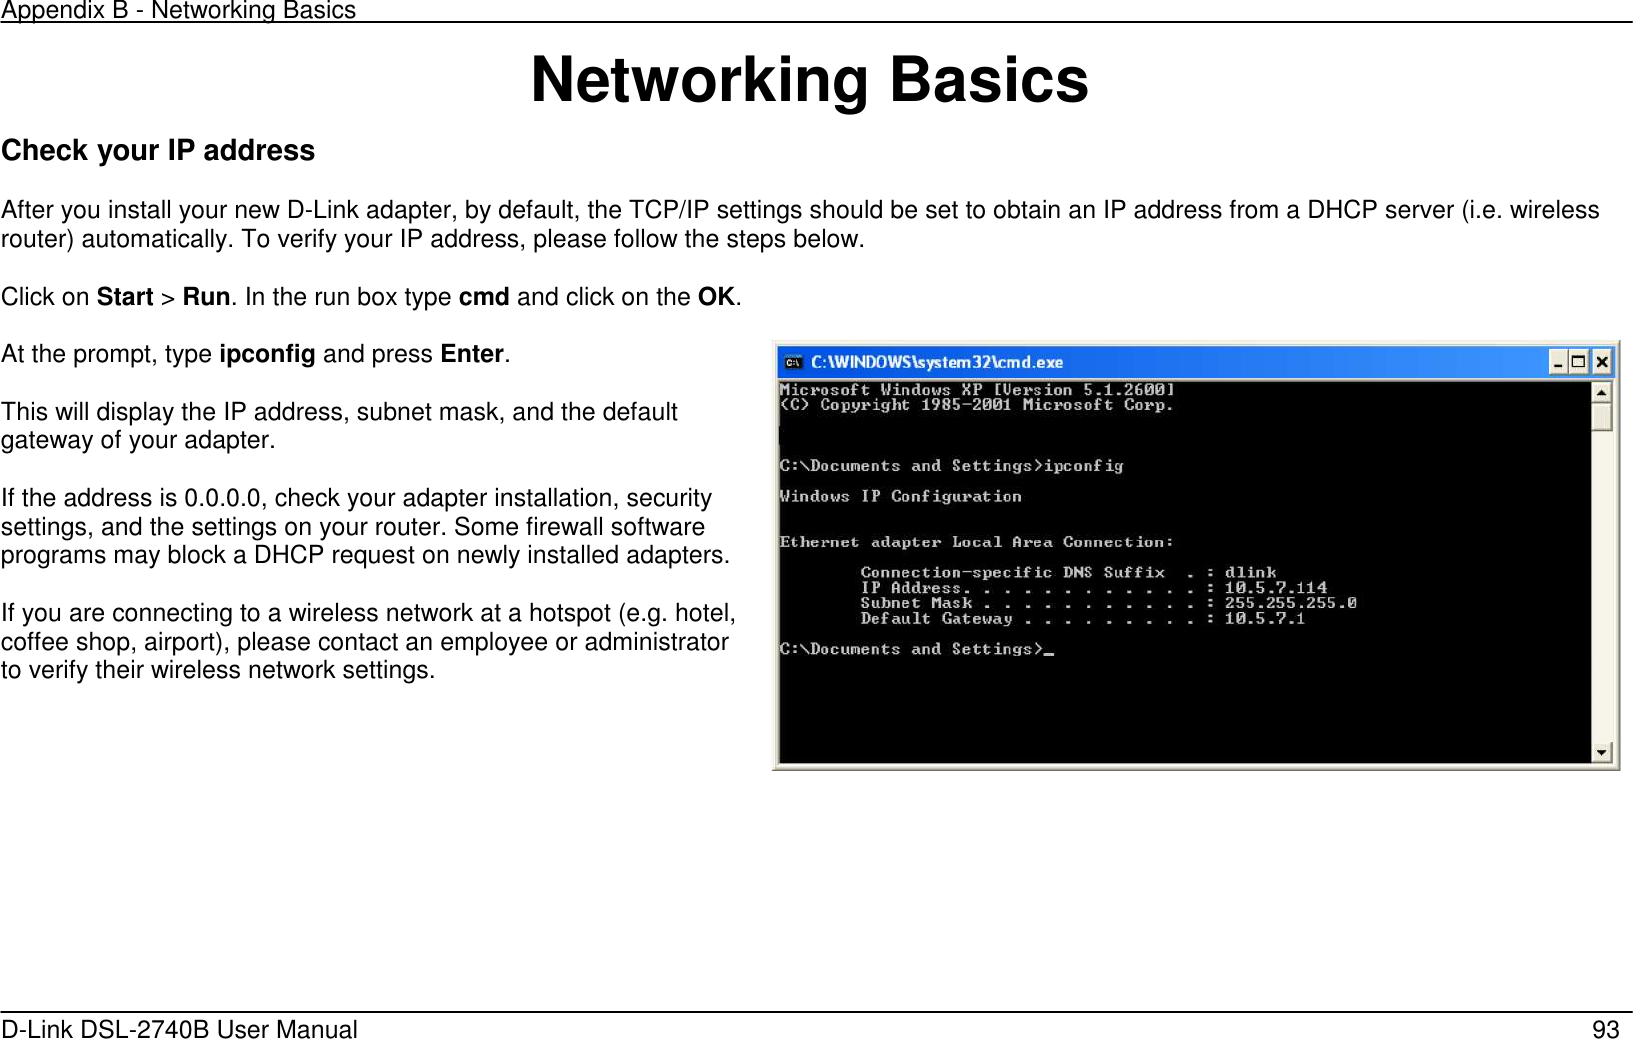 Appendix B - Networking Basics   D-Link DSL-2740B User Manual                                                  93 Networking Basics Check your IP address  After you install your new D-Link adapter, by default, the TCP/IP settings should be set to obtain an IP address from a DHCP server (i.e. wireless router) automatically. To verify your IP address, please follow the steps below.  Click on Start &gt; Run. In the run box type cmd and click on the OK.  At the prompt, type ipconfig and press Enter.  This will display the IP address, subnet mask, and the default gateway of your adapter.  If the address is 0.0.0.0, check your adapter installation, security settings, and the settings on your router. Some firewall software programs may block a DHCP request on newly installed adapters.  If you are connecting to a wireless network at a hotspot (e.g. hotel, coffee shop, airport), please contact an employee or administrator to verify their wireless network settings.    